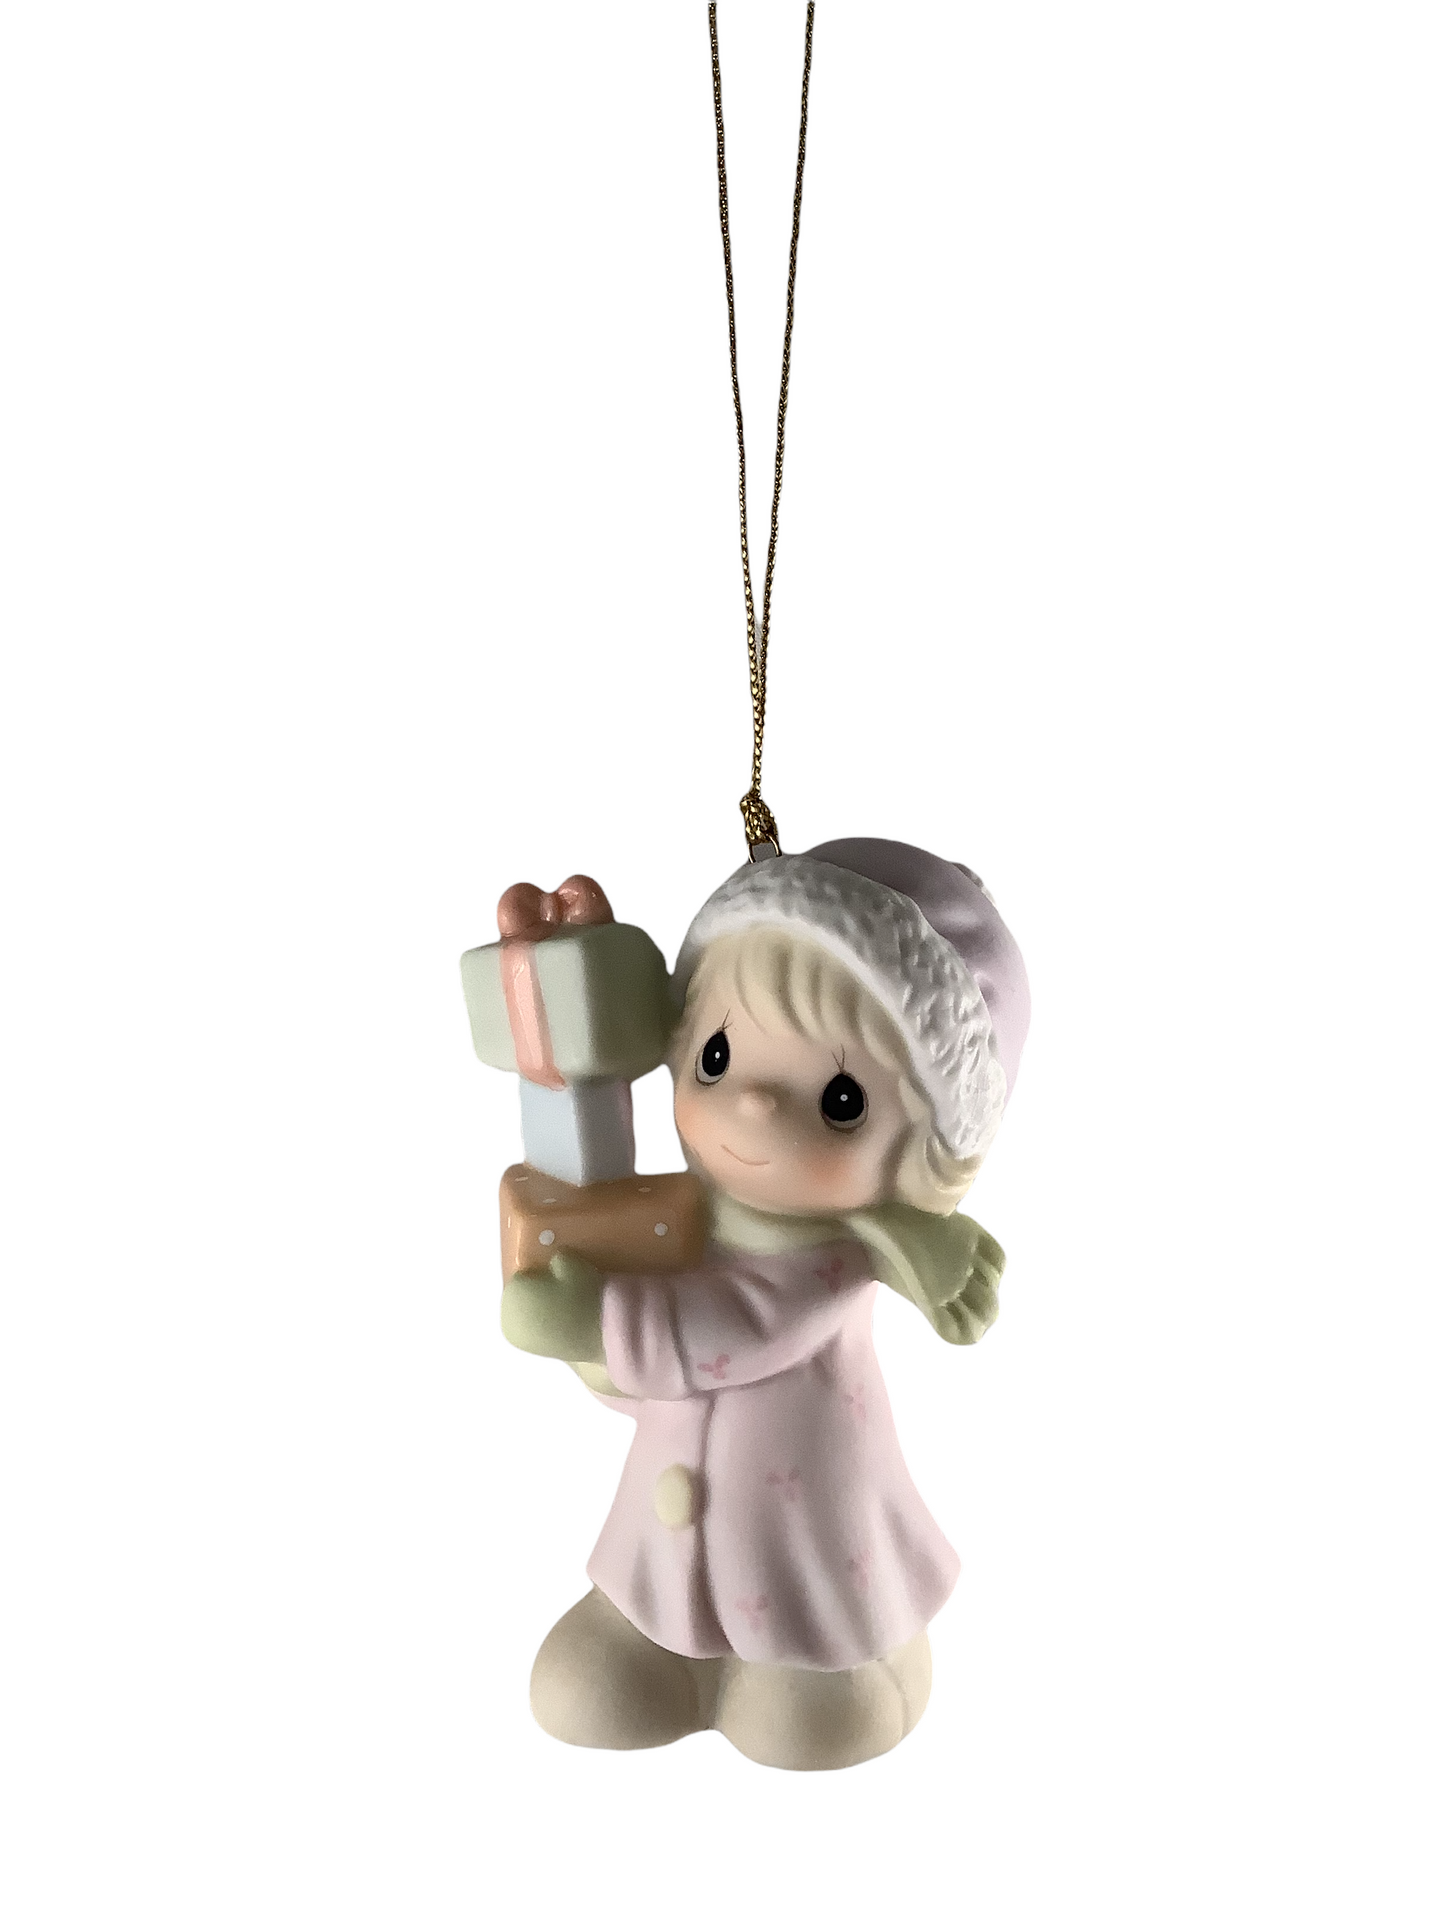 The Best Gifts Are Loving, Caring, And Sharing - Precious Moment Ornament